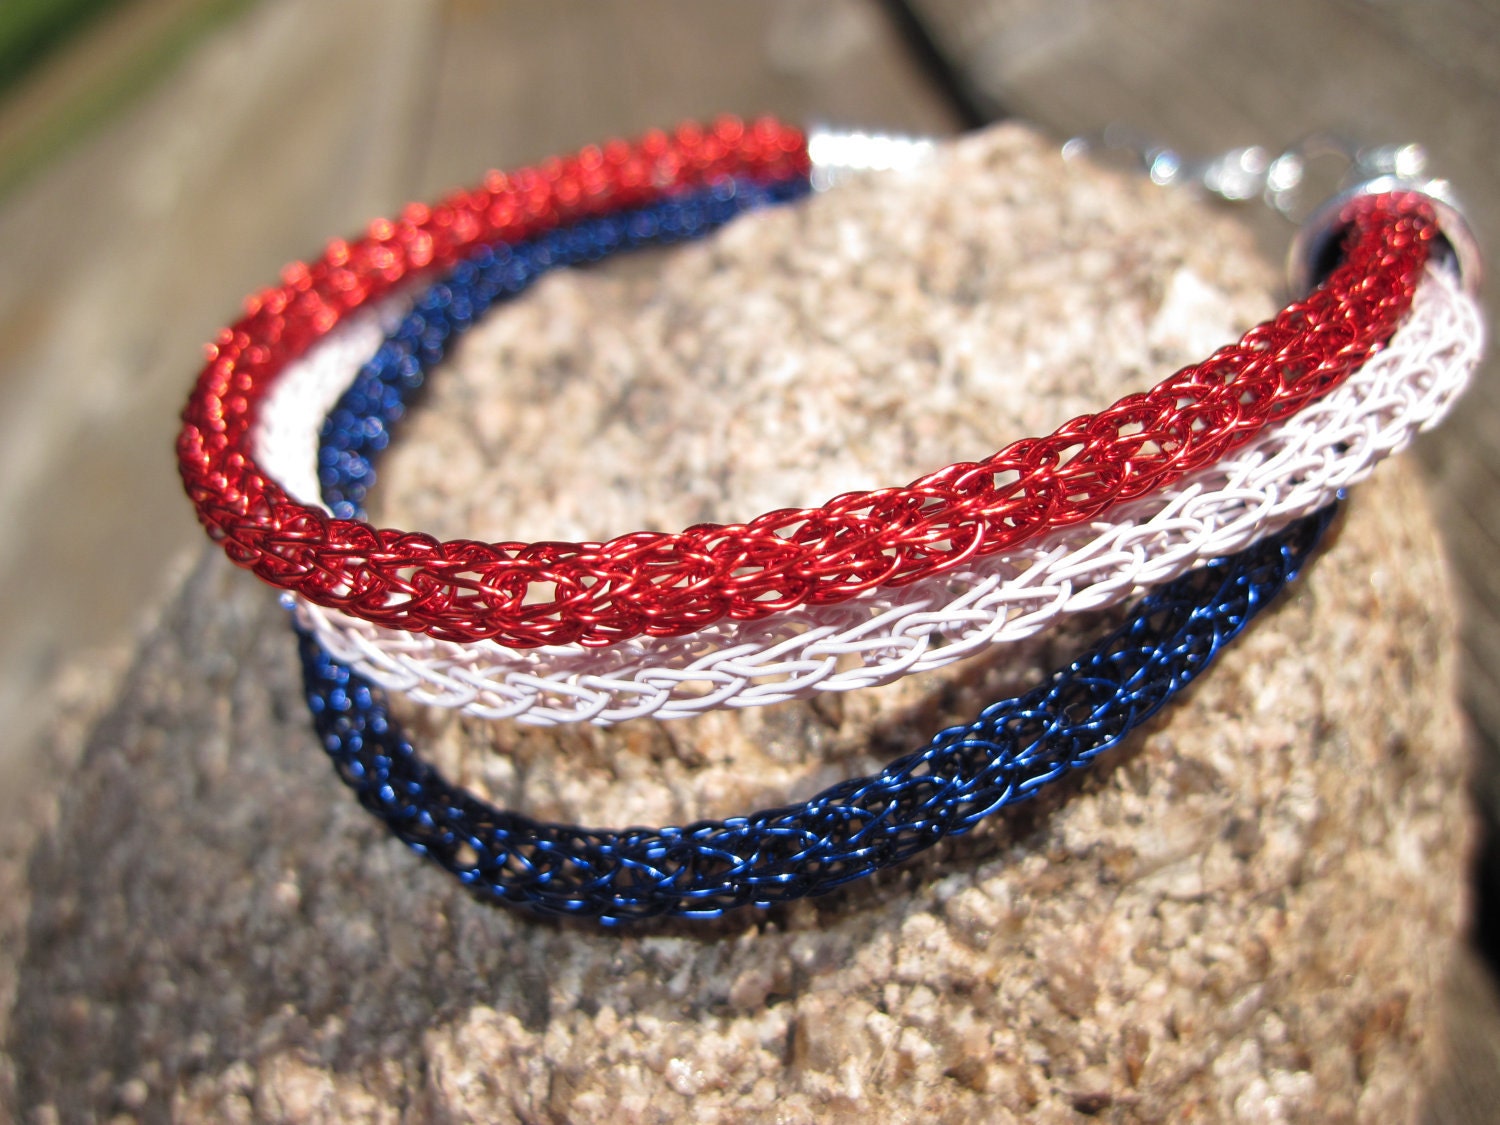 Price Reduced -- Patriotic Bracelet in Viking Knit, Red White and Blue